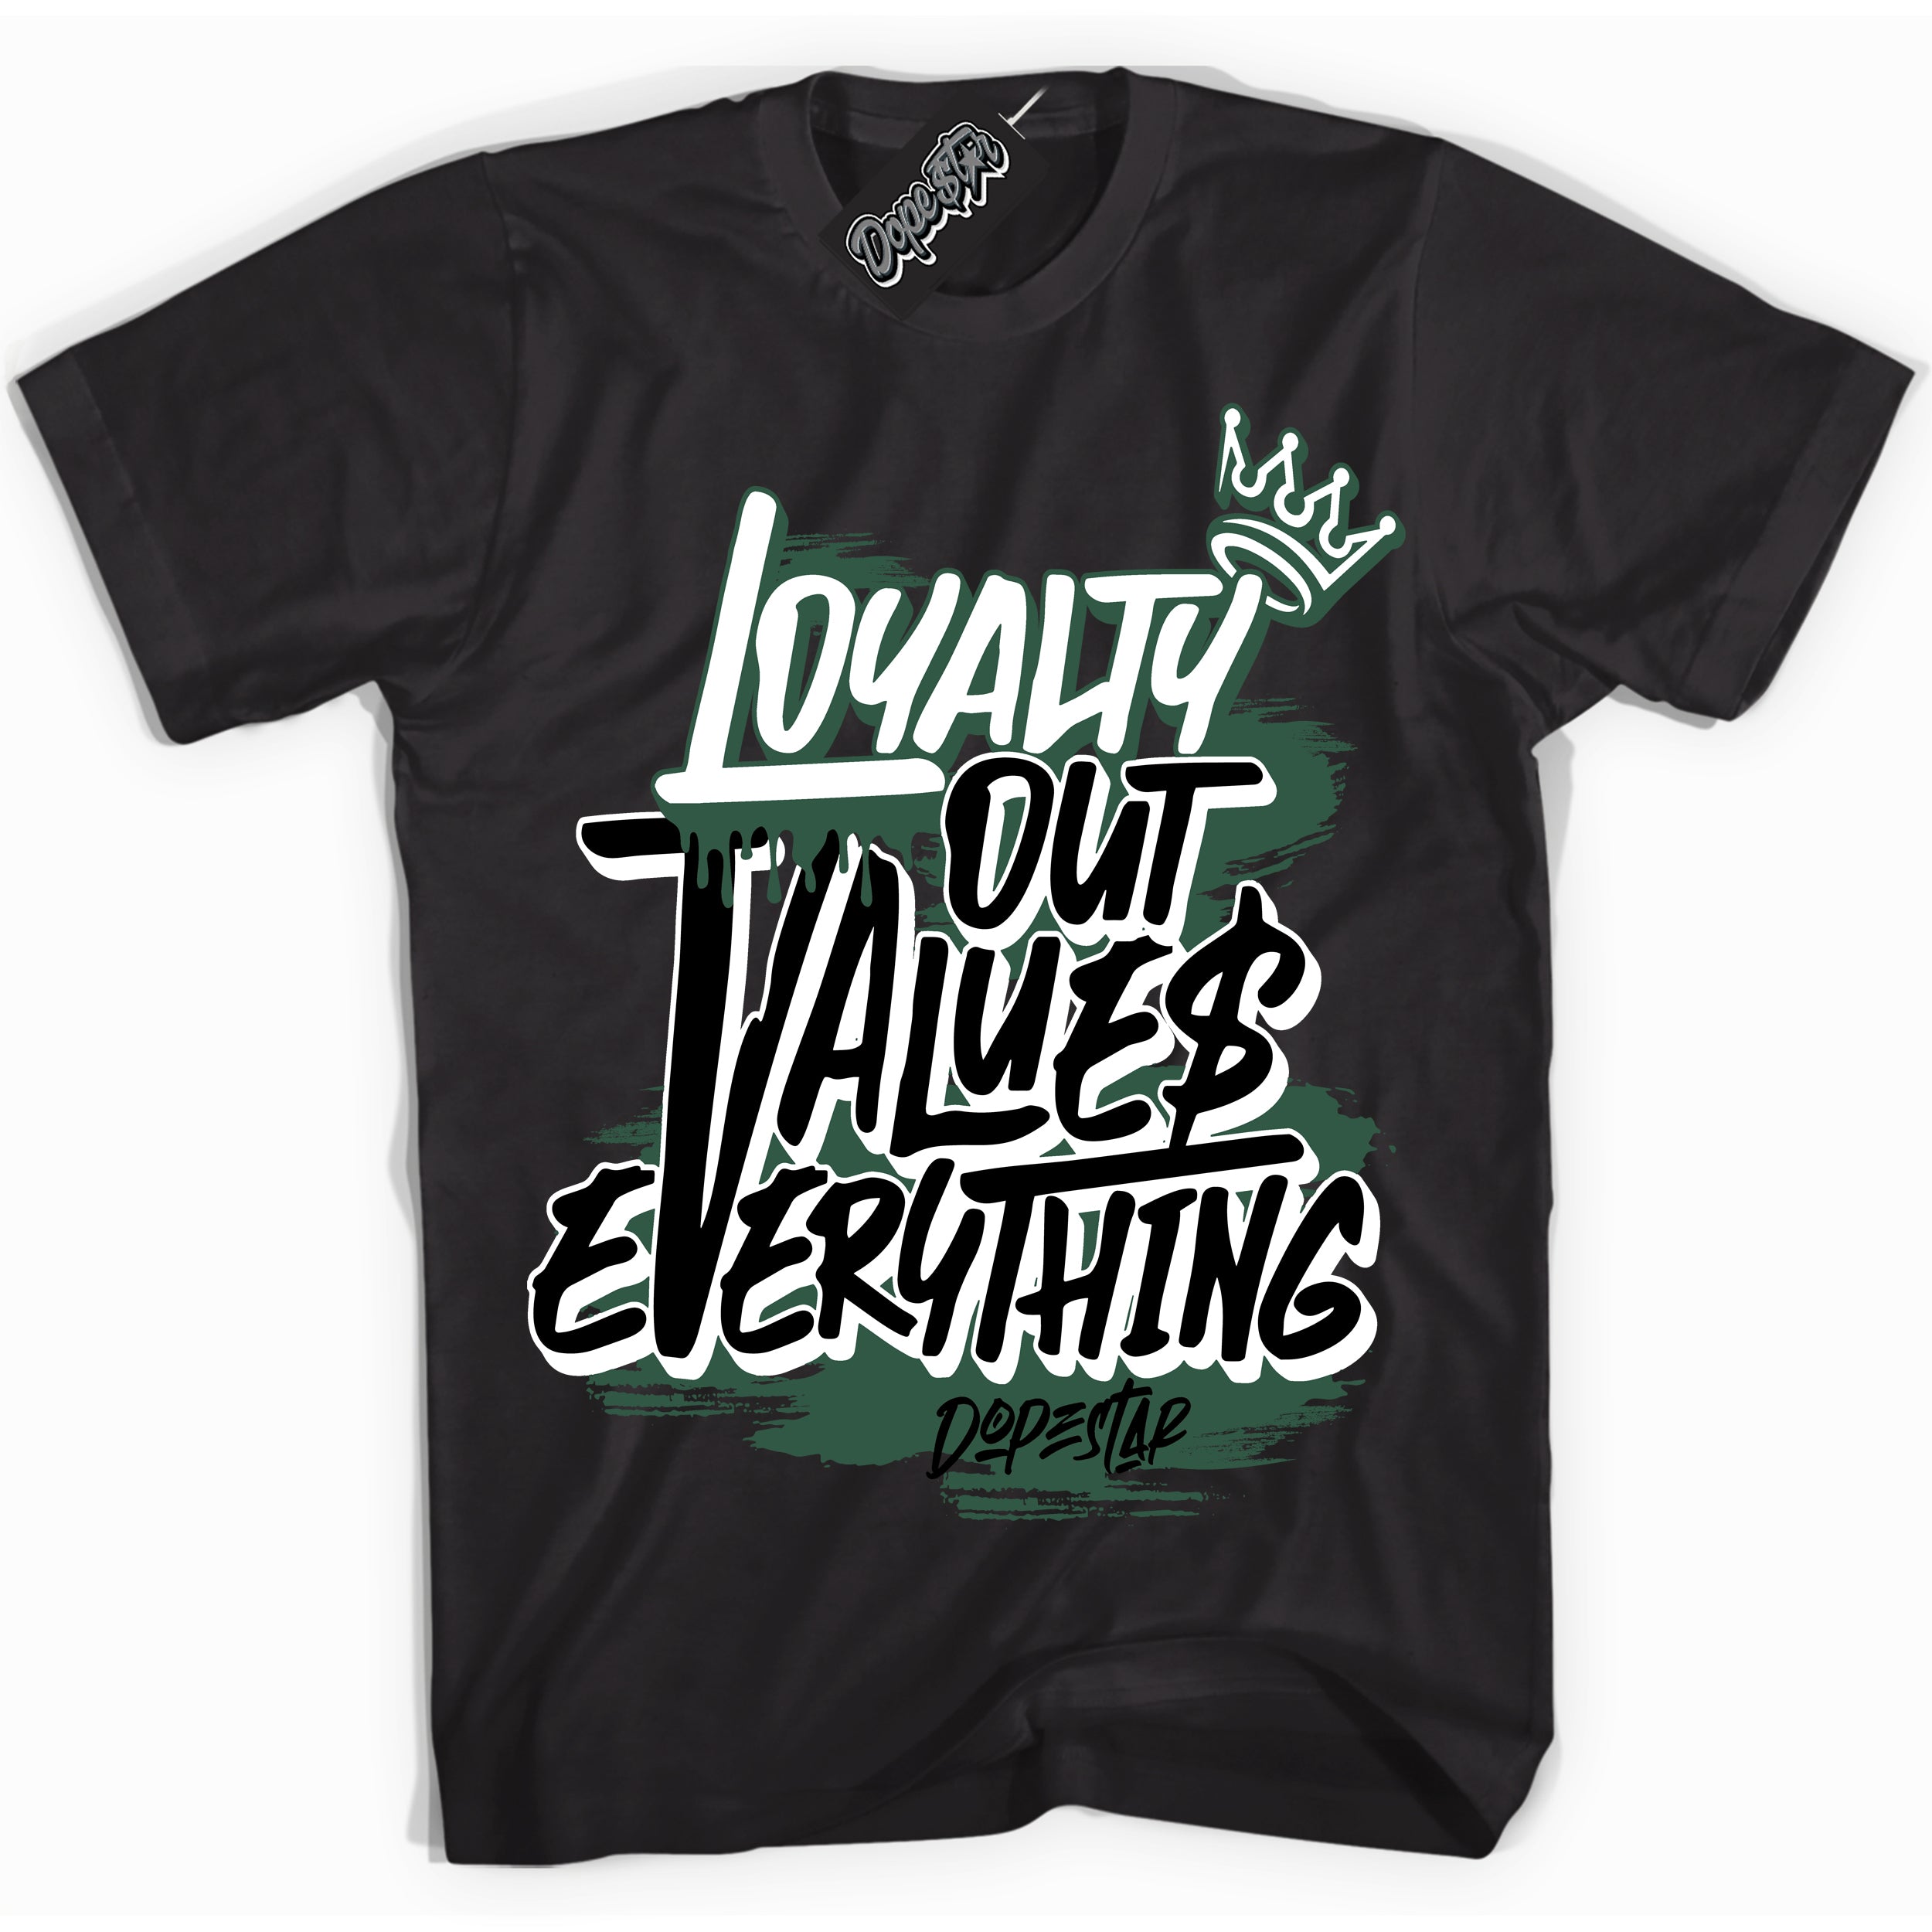 Cool Black Shirt with “ Loyalty Out Values Everything” design that perfectly matches Golf Noble Green 1s Sneakers.